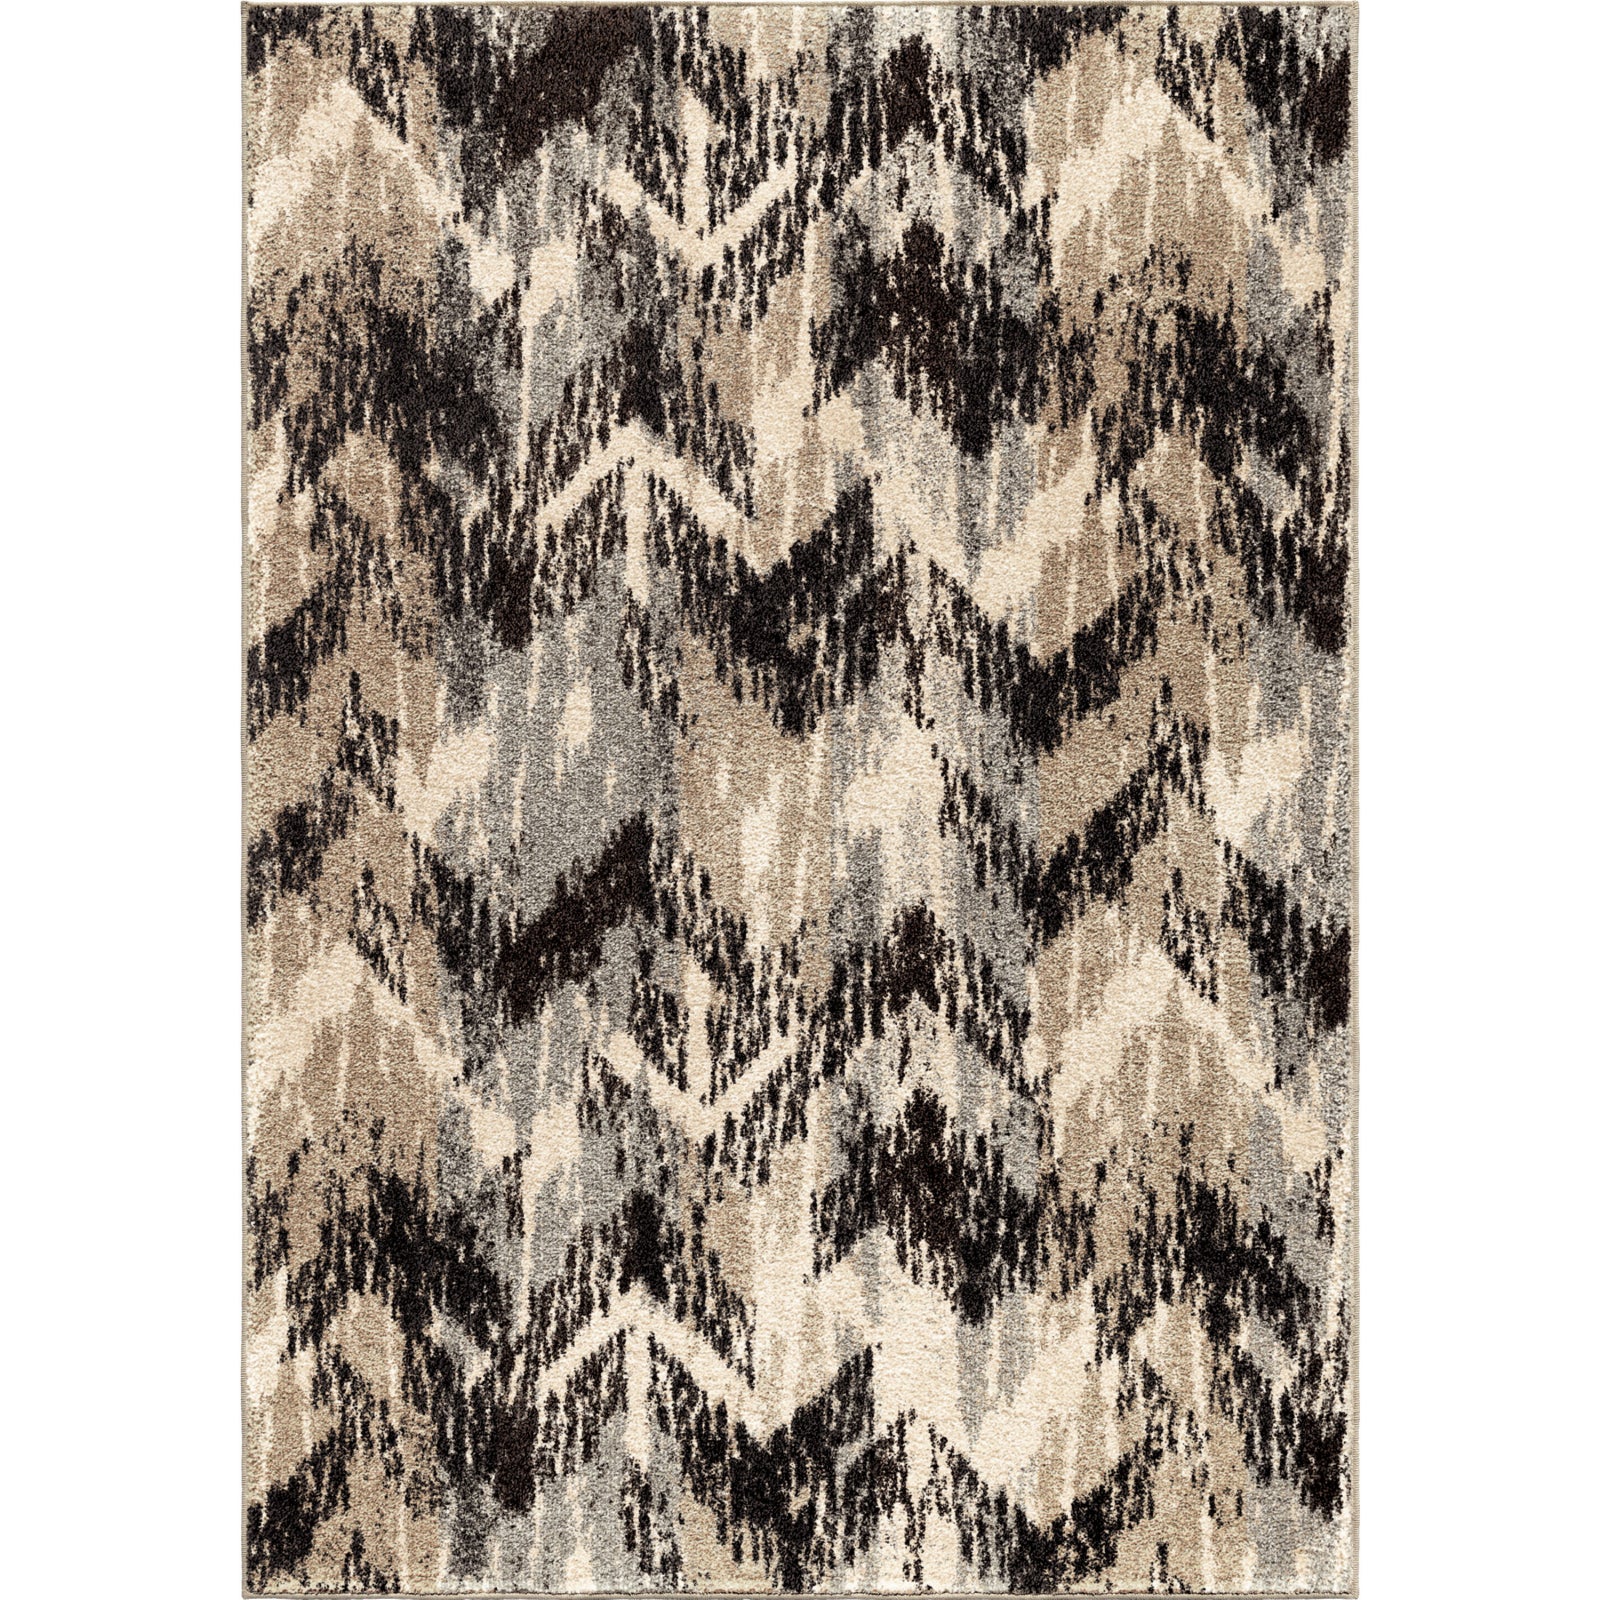 Orian Rugs American Classics Twisted Sisters Gray Area Rug main image